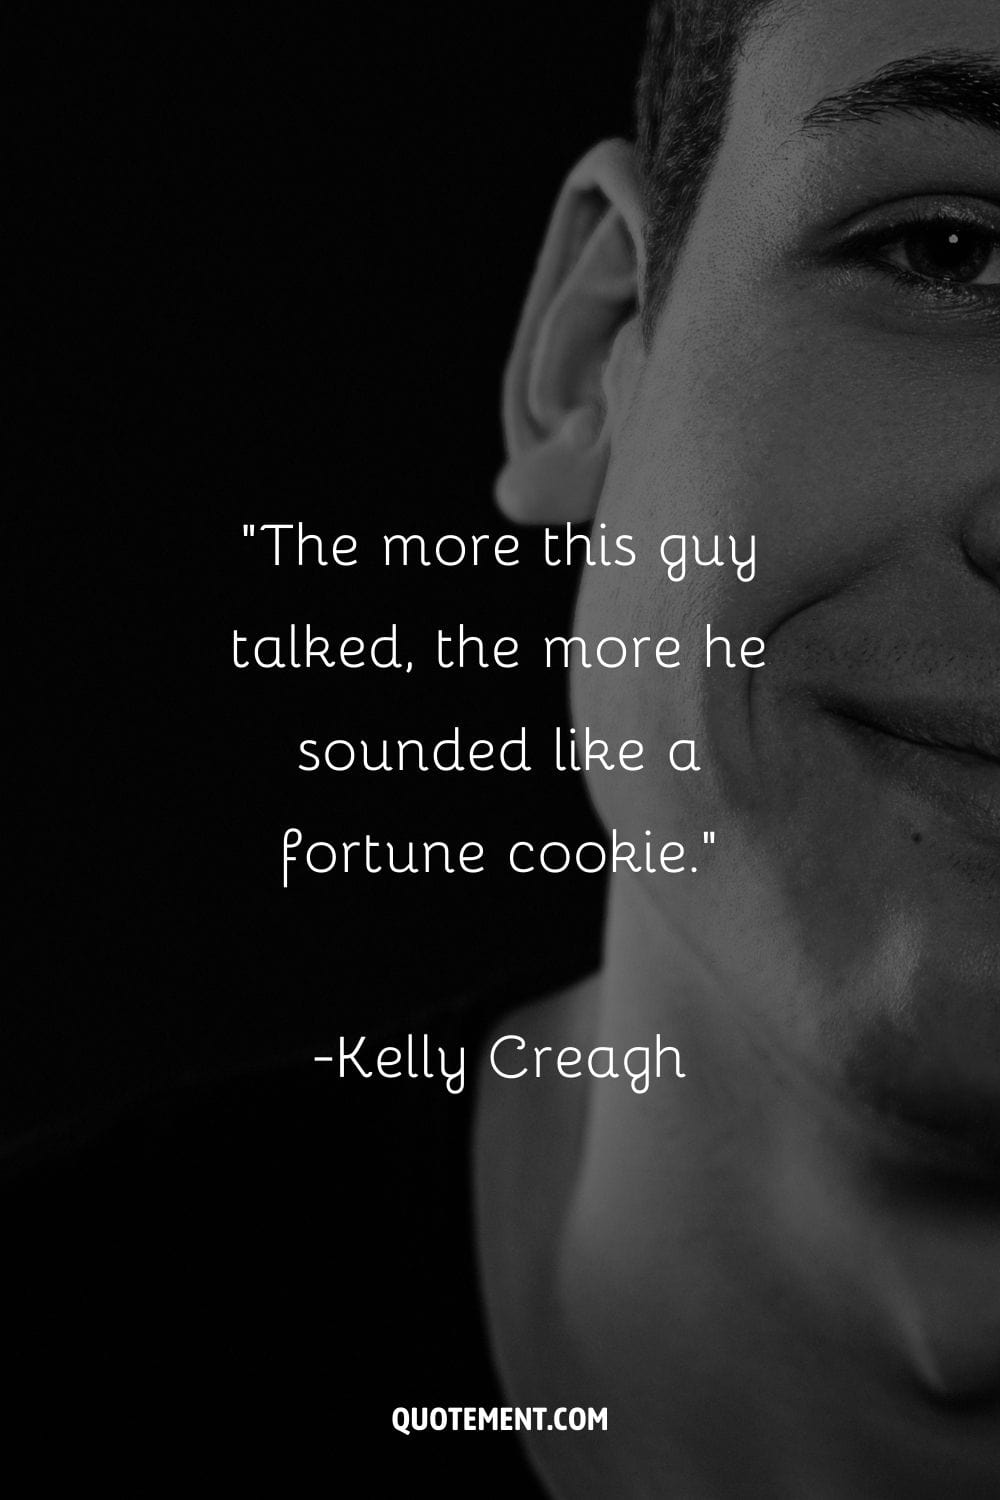 “The more this guy talked, the more he sounded like a fortune cookie.” ― Kelly Creagh, Nevermore